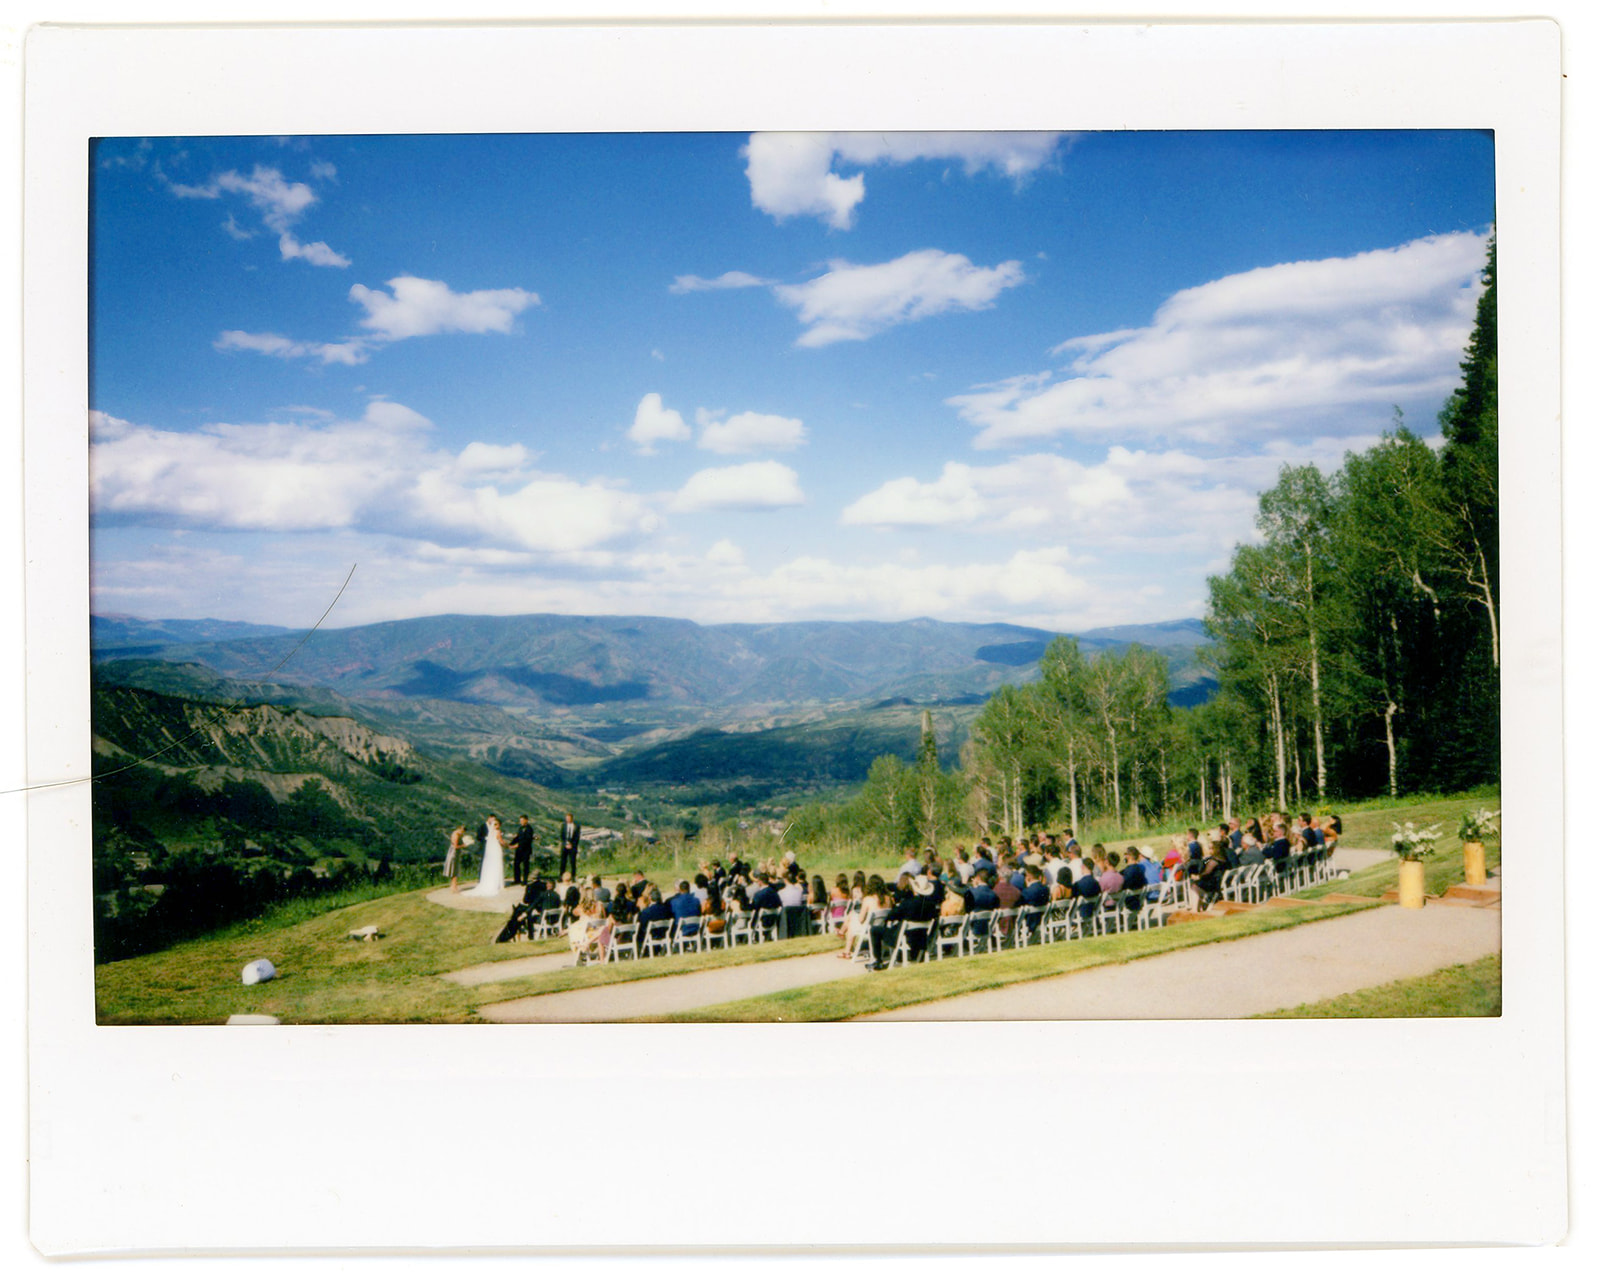 The views of the ceremony location of Limelight wedding terrace. Bird's eye view of the ceremony. Shot on polaroid.